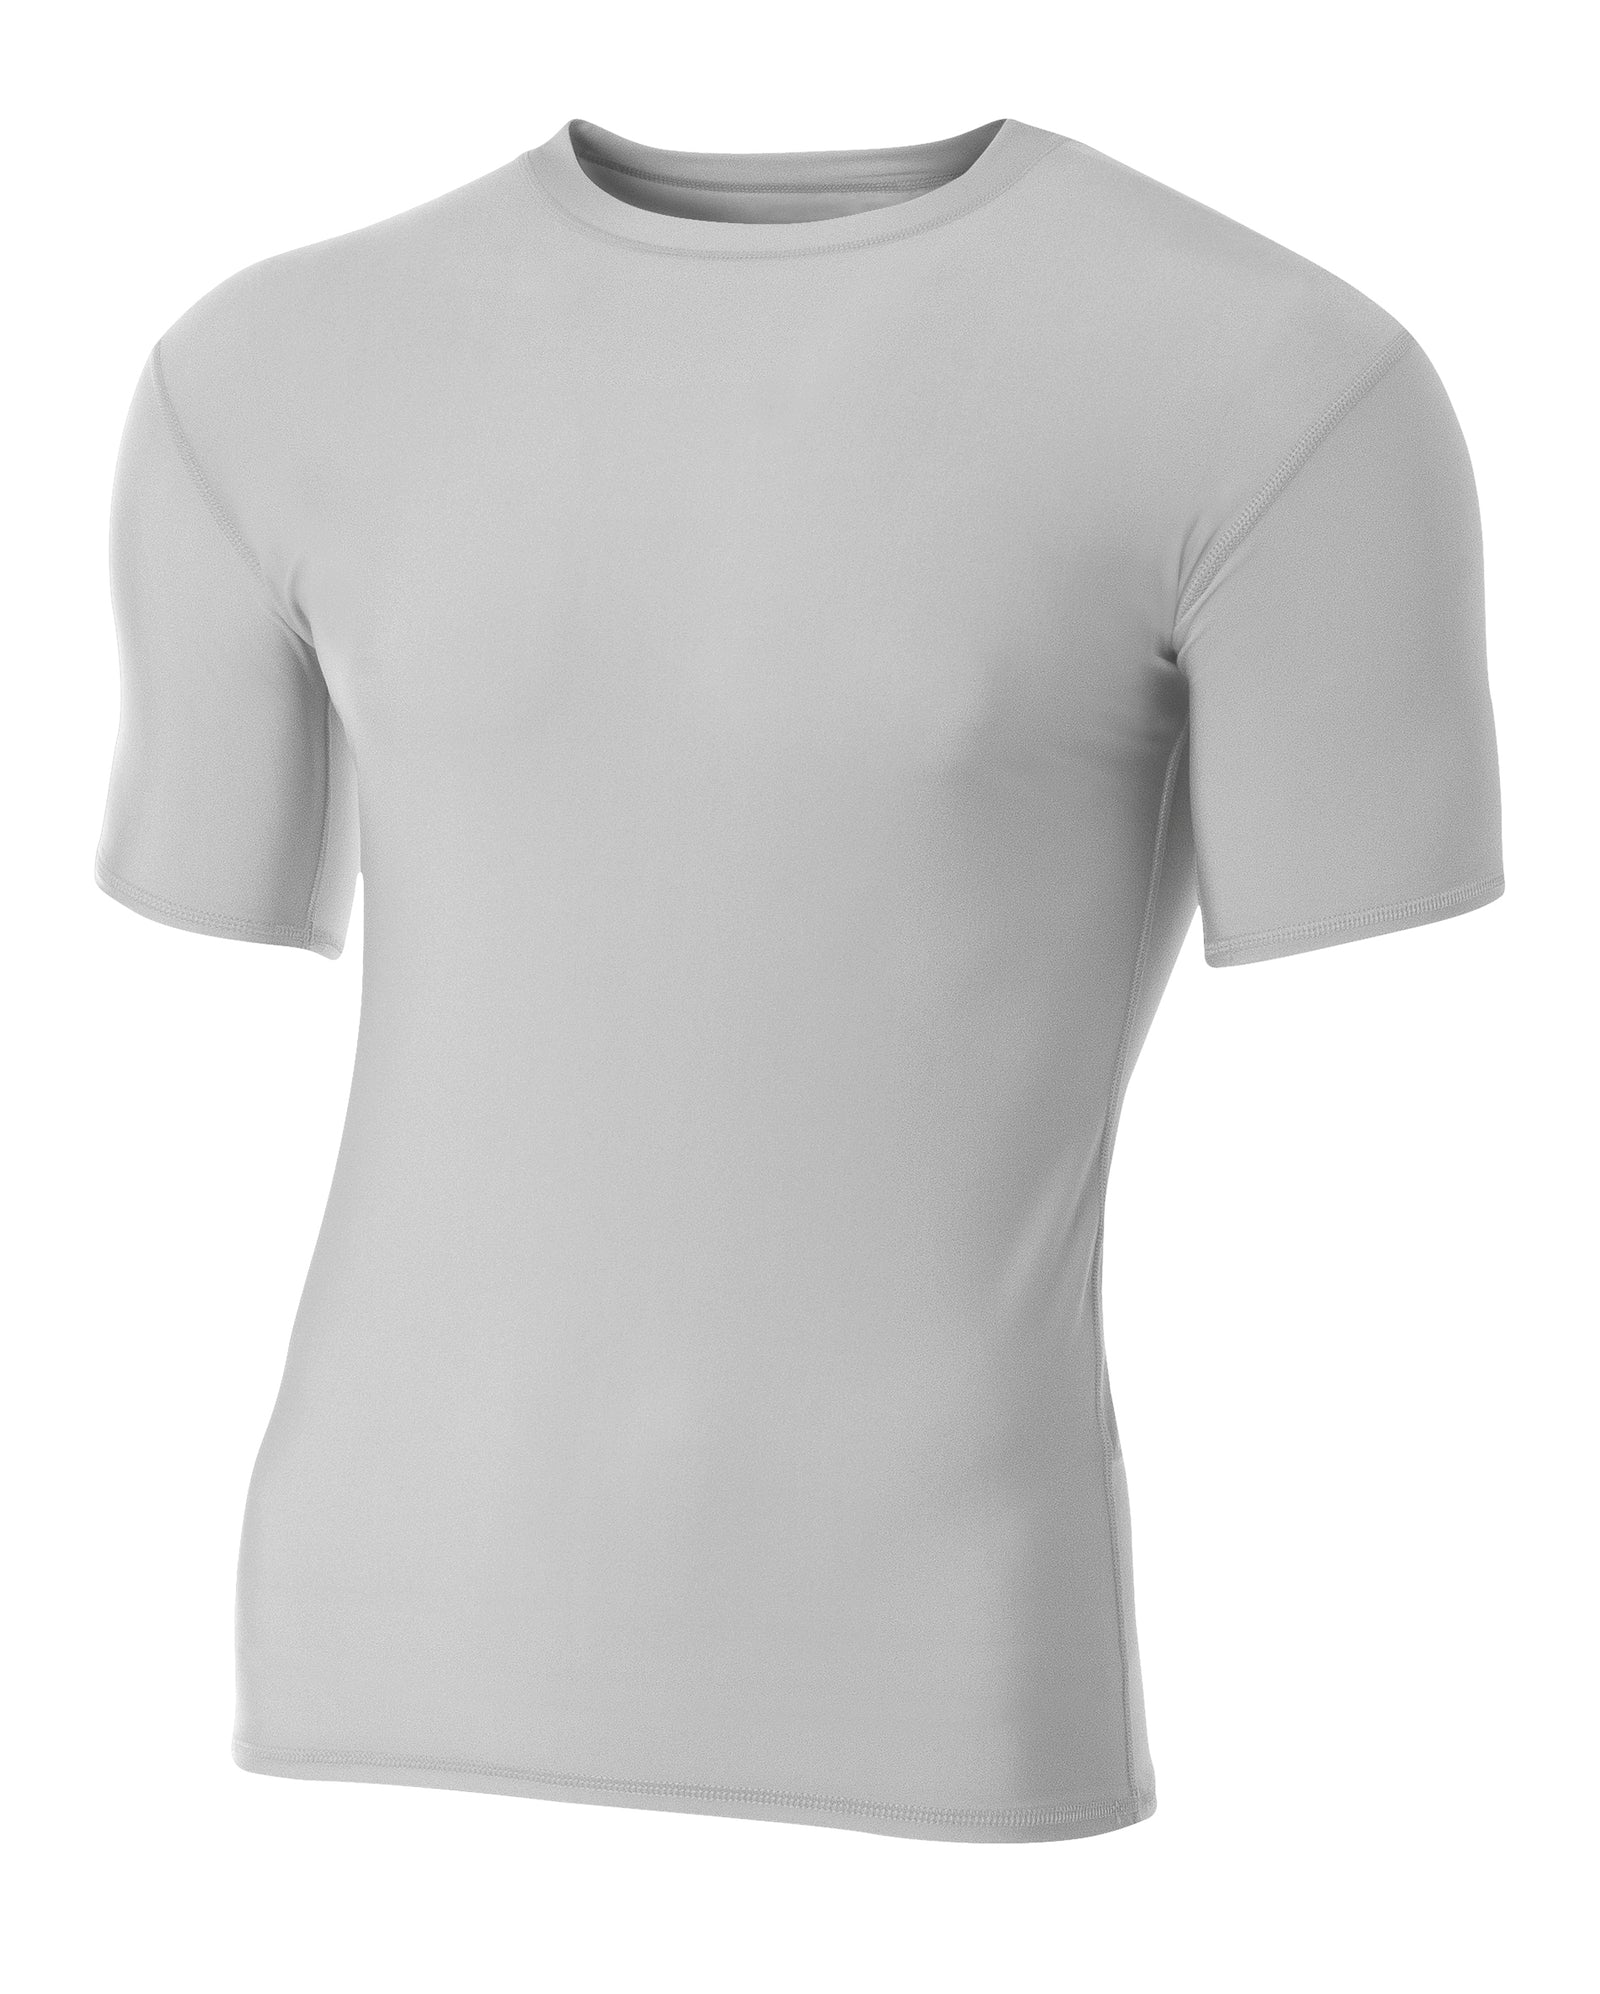 Silver A4 A4 Youth Short Sleeve Compression Crew